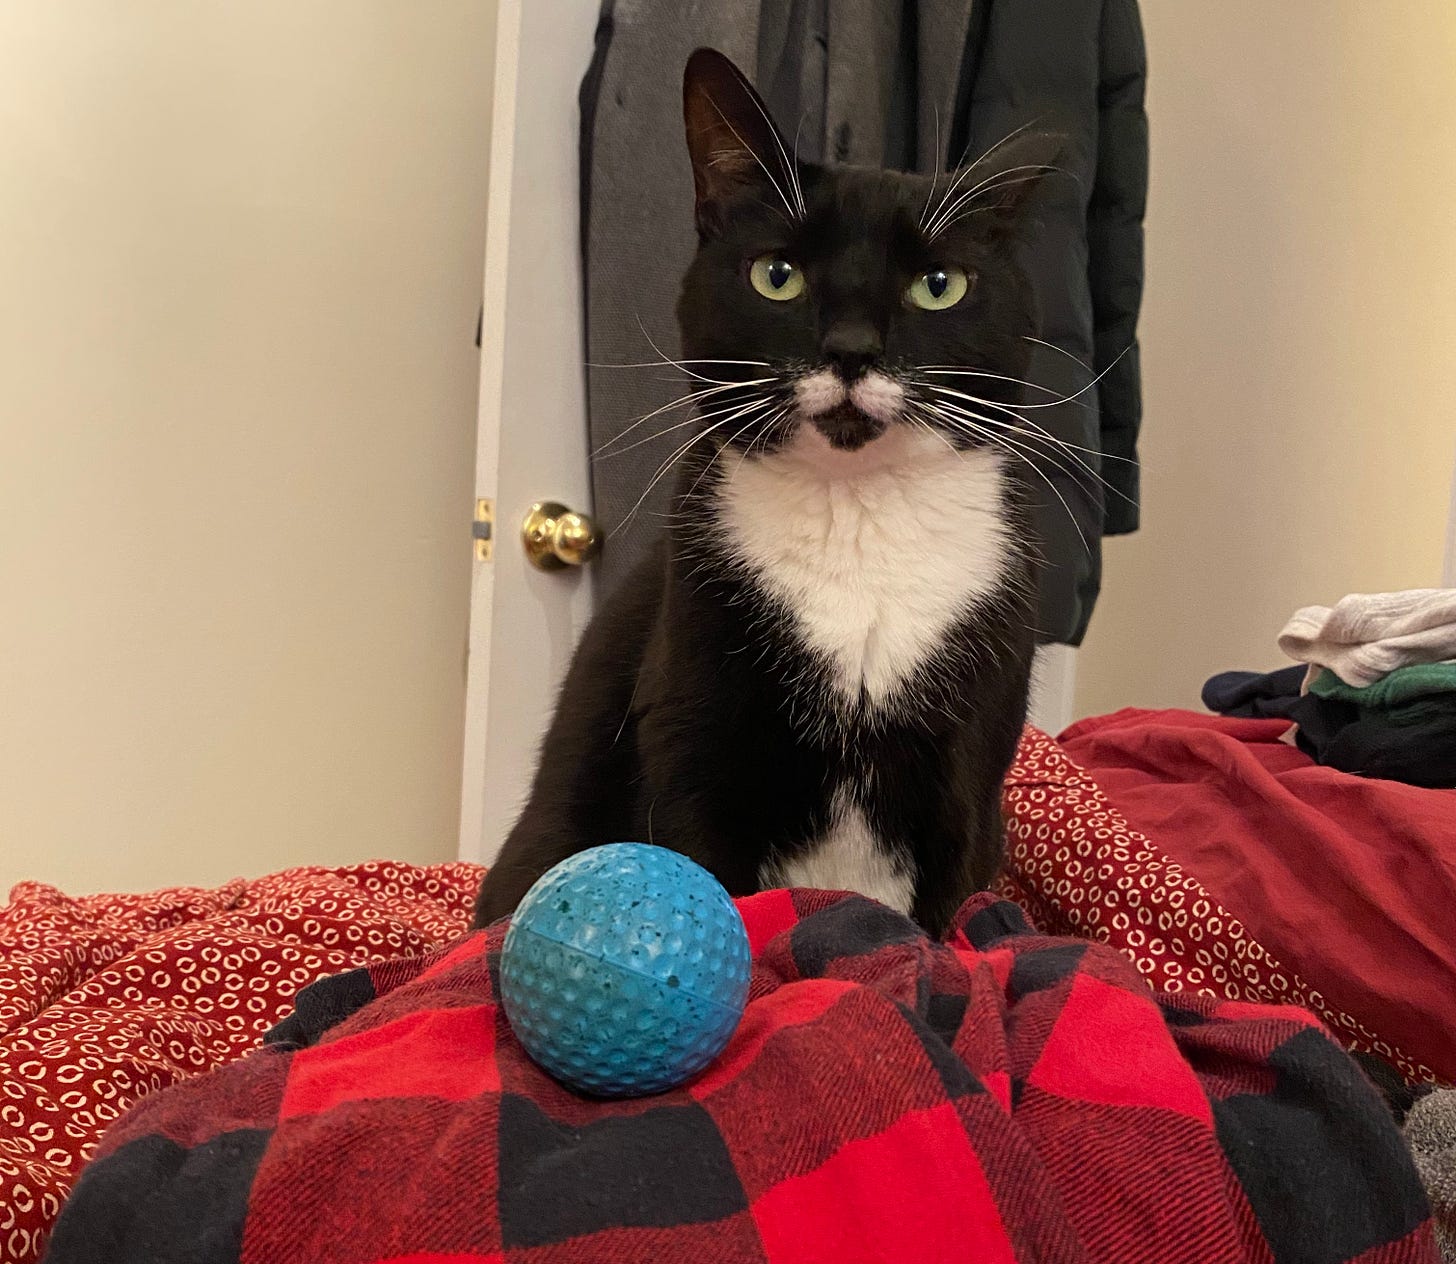 A black and white cat stares at the camera. Her blue bouncy ball sits in the foreground.